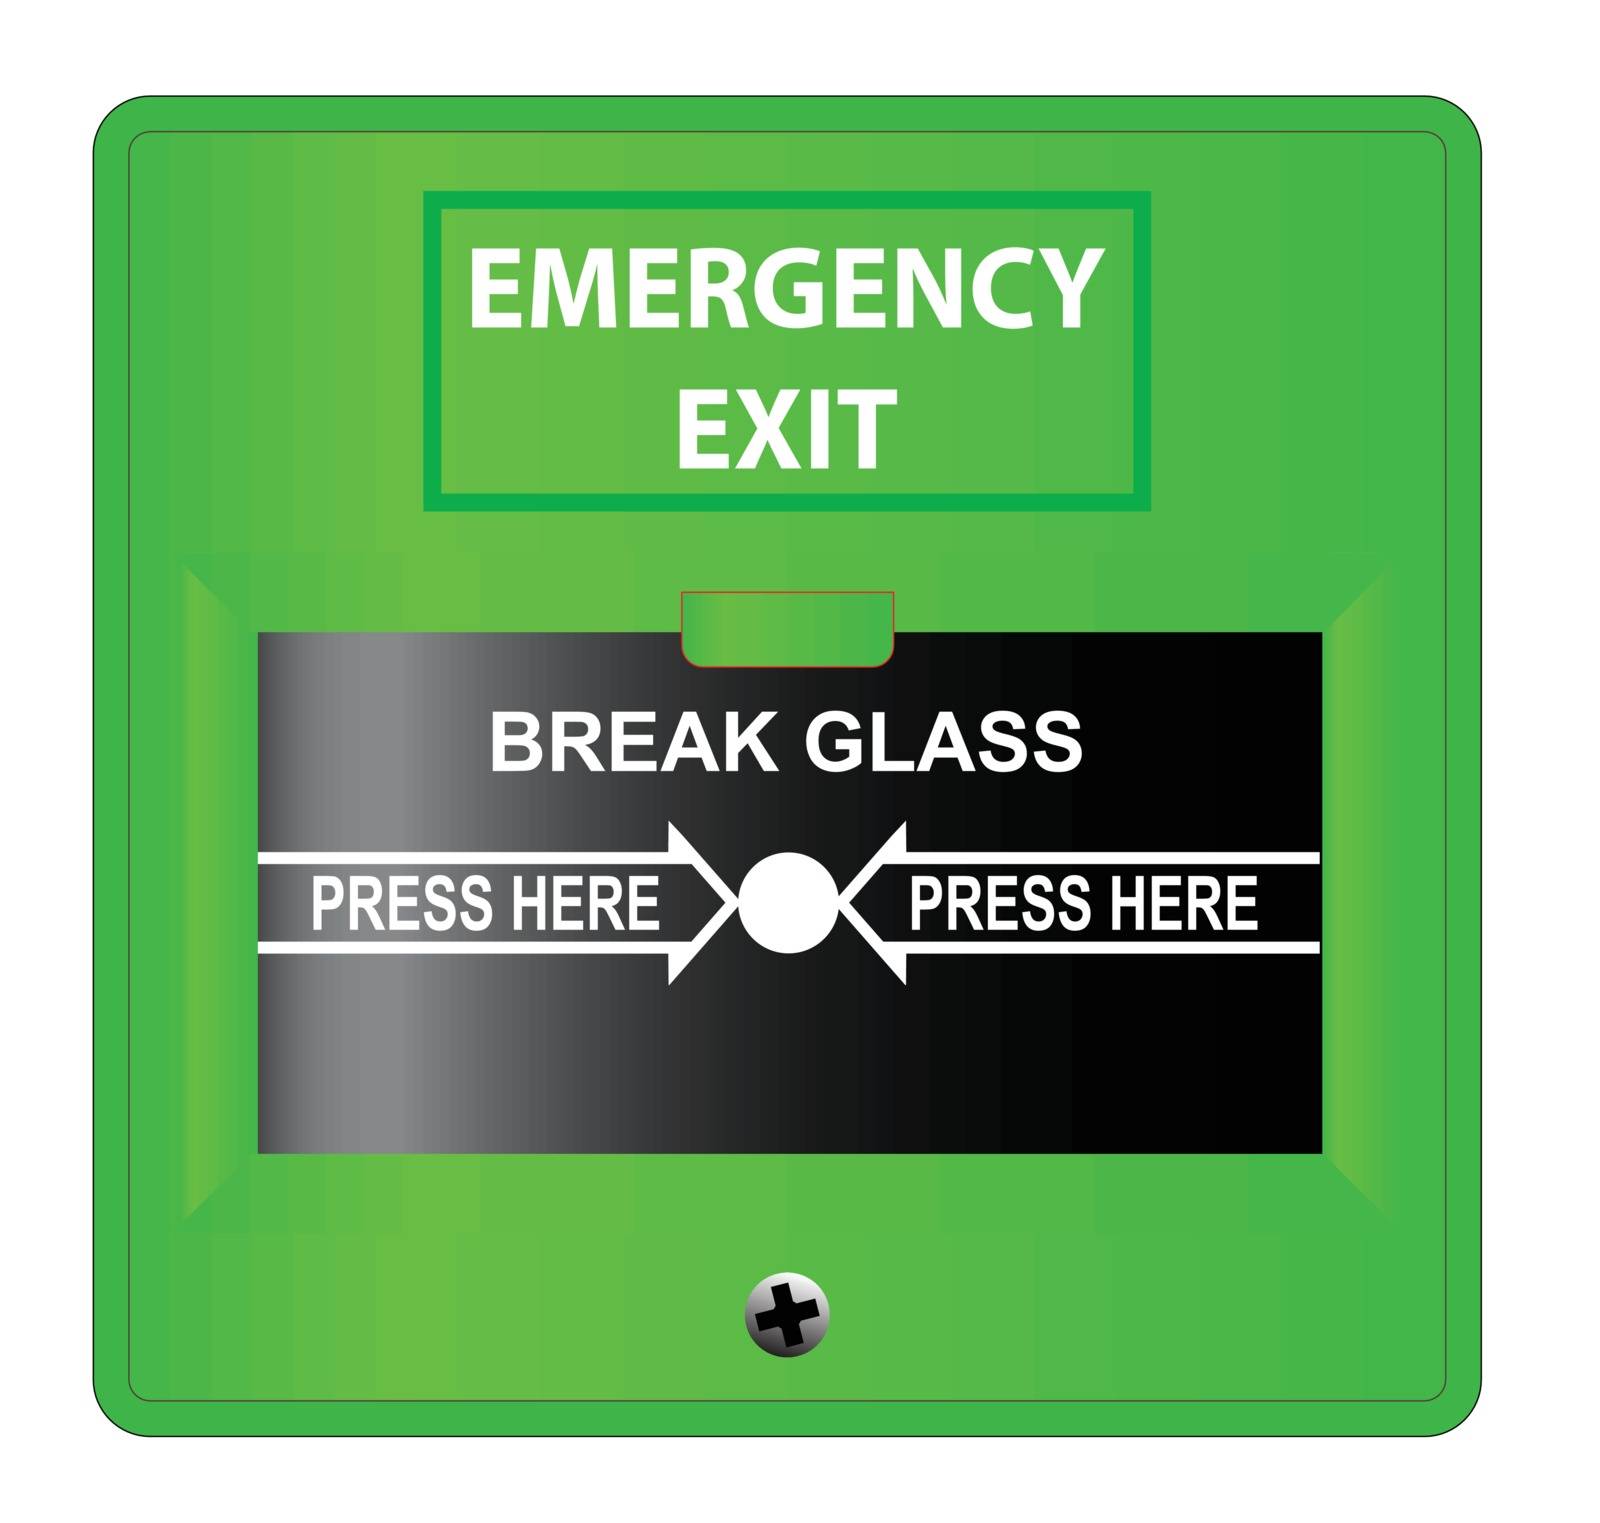 A green 'break glass' emergency exit button over a white background.